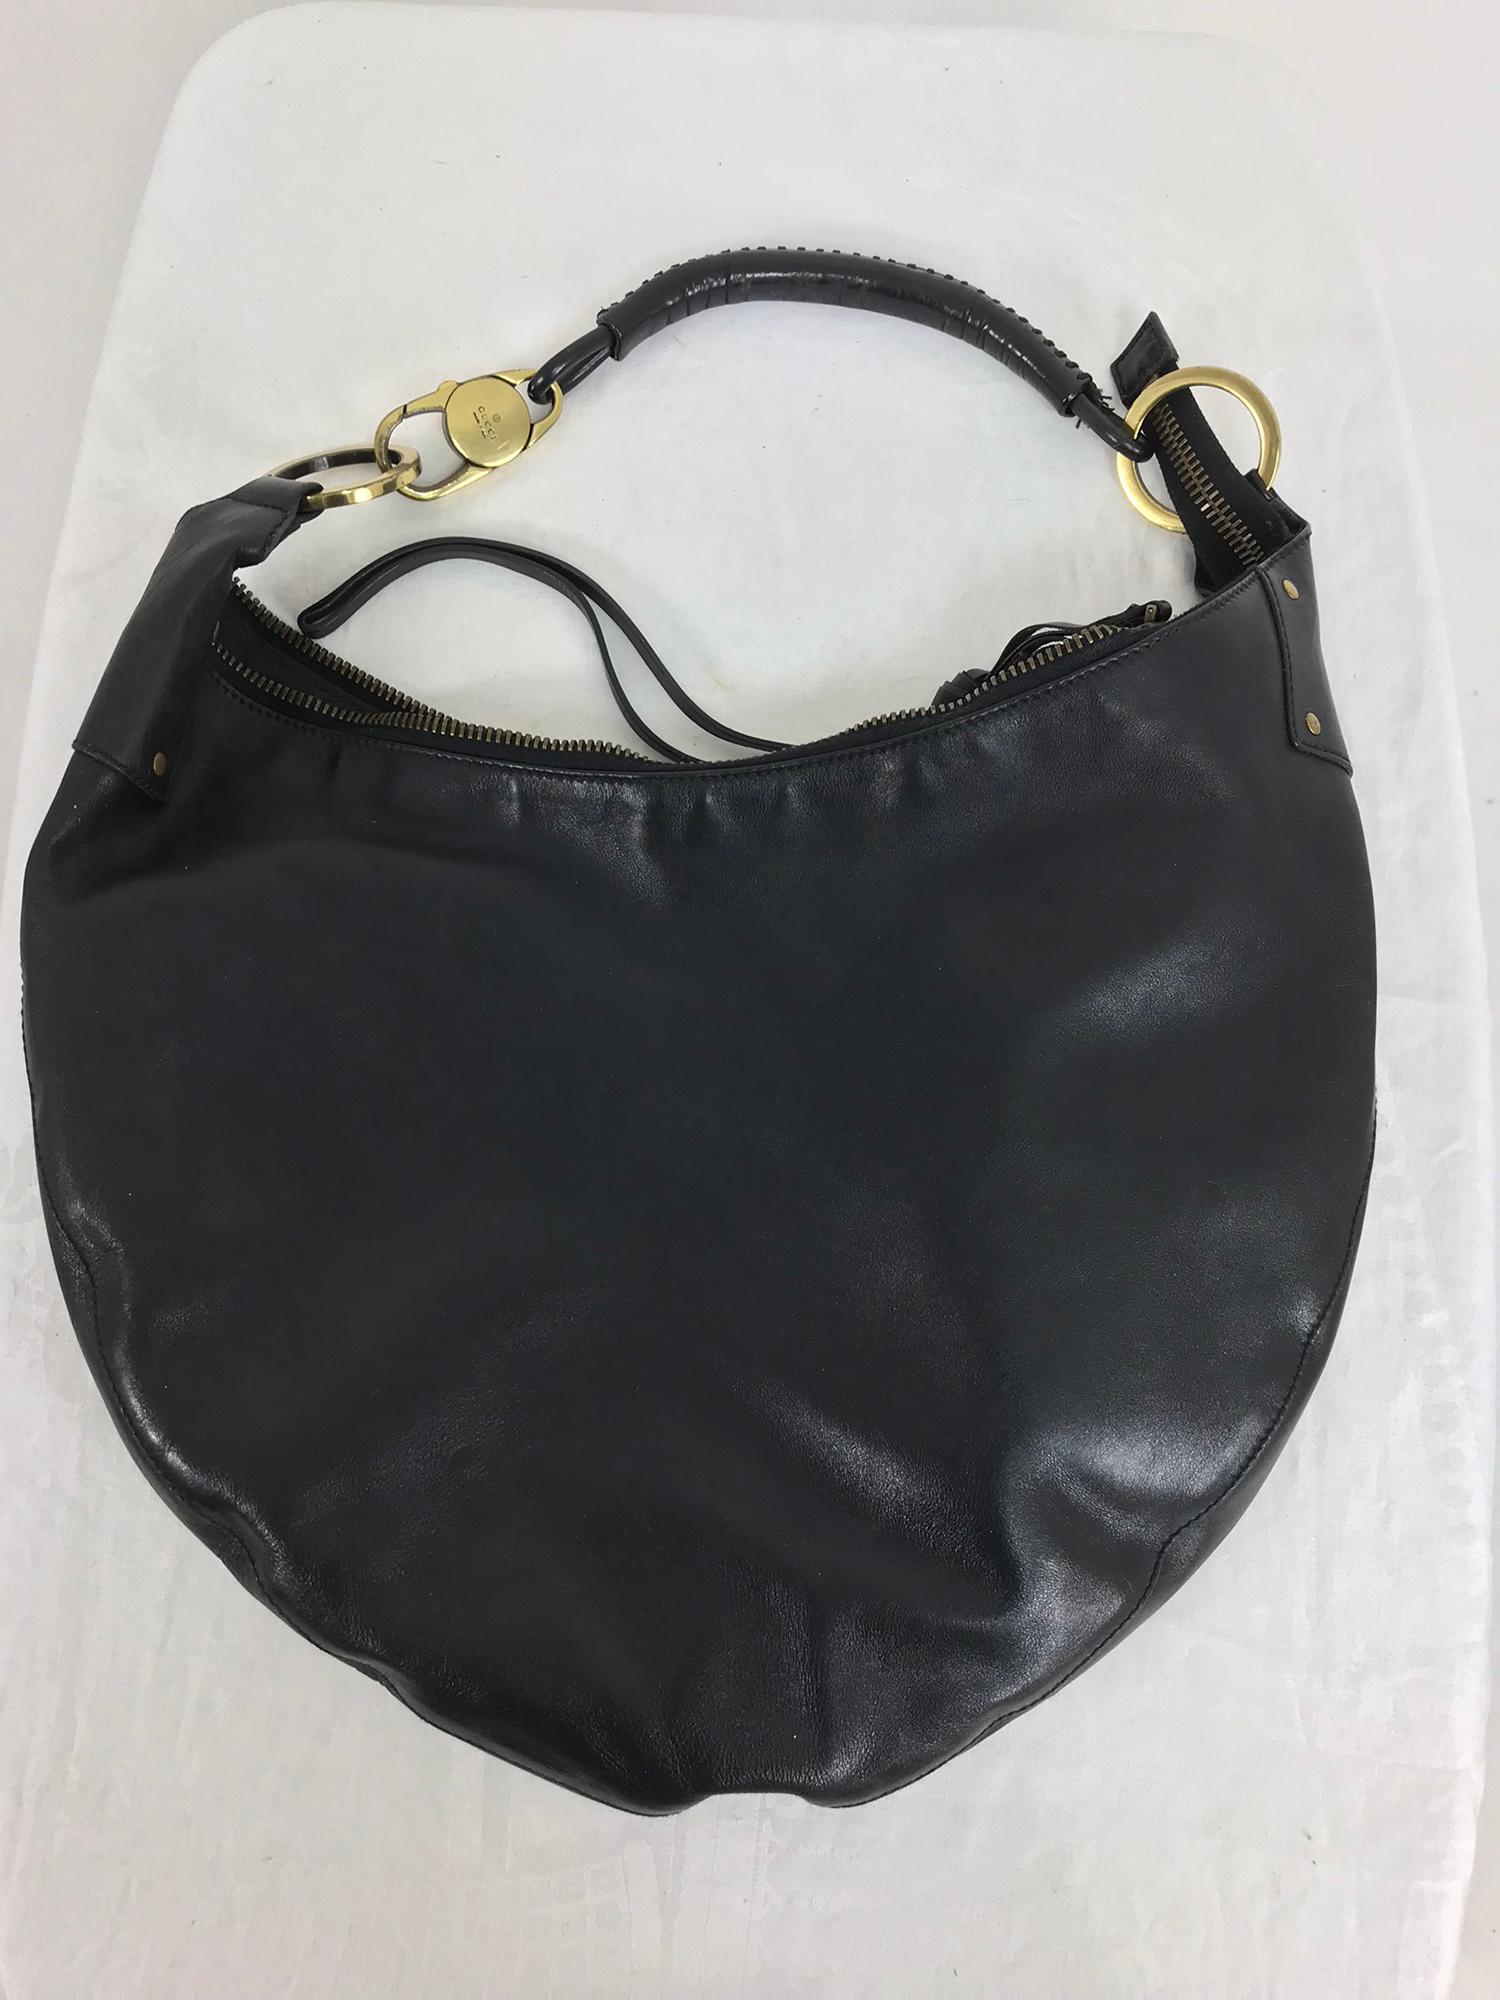 Gucci black leather shoulder bag with gold hardware. This beautiful bag looks barely, if ever worn. Laced leather shoulder strap with gold hardware, all marked Gucci. The sling shape leather bag closes with a heavy brass zipper, there are long